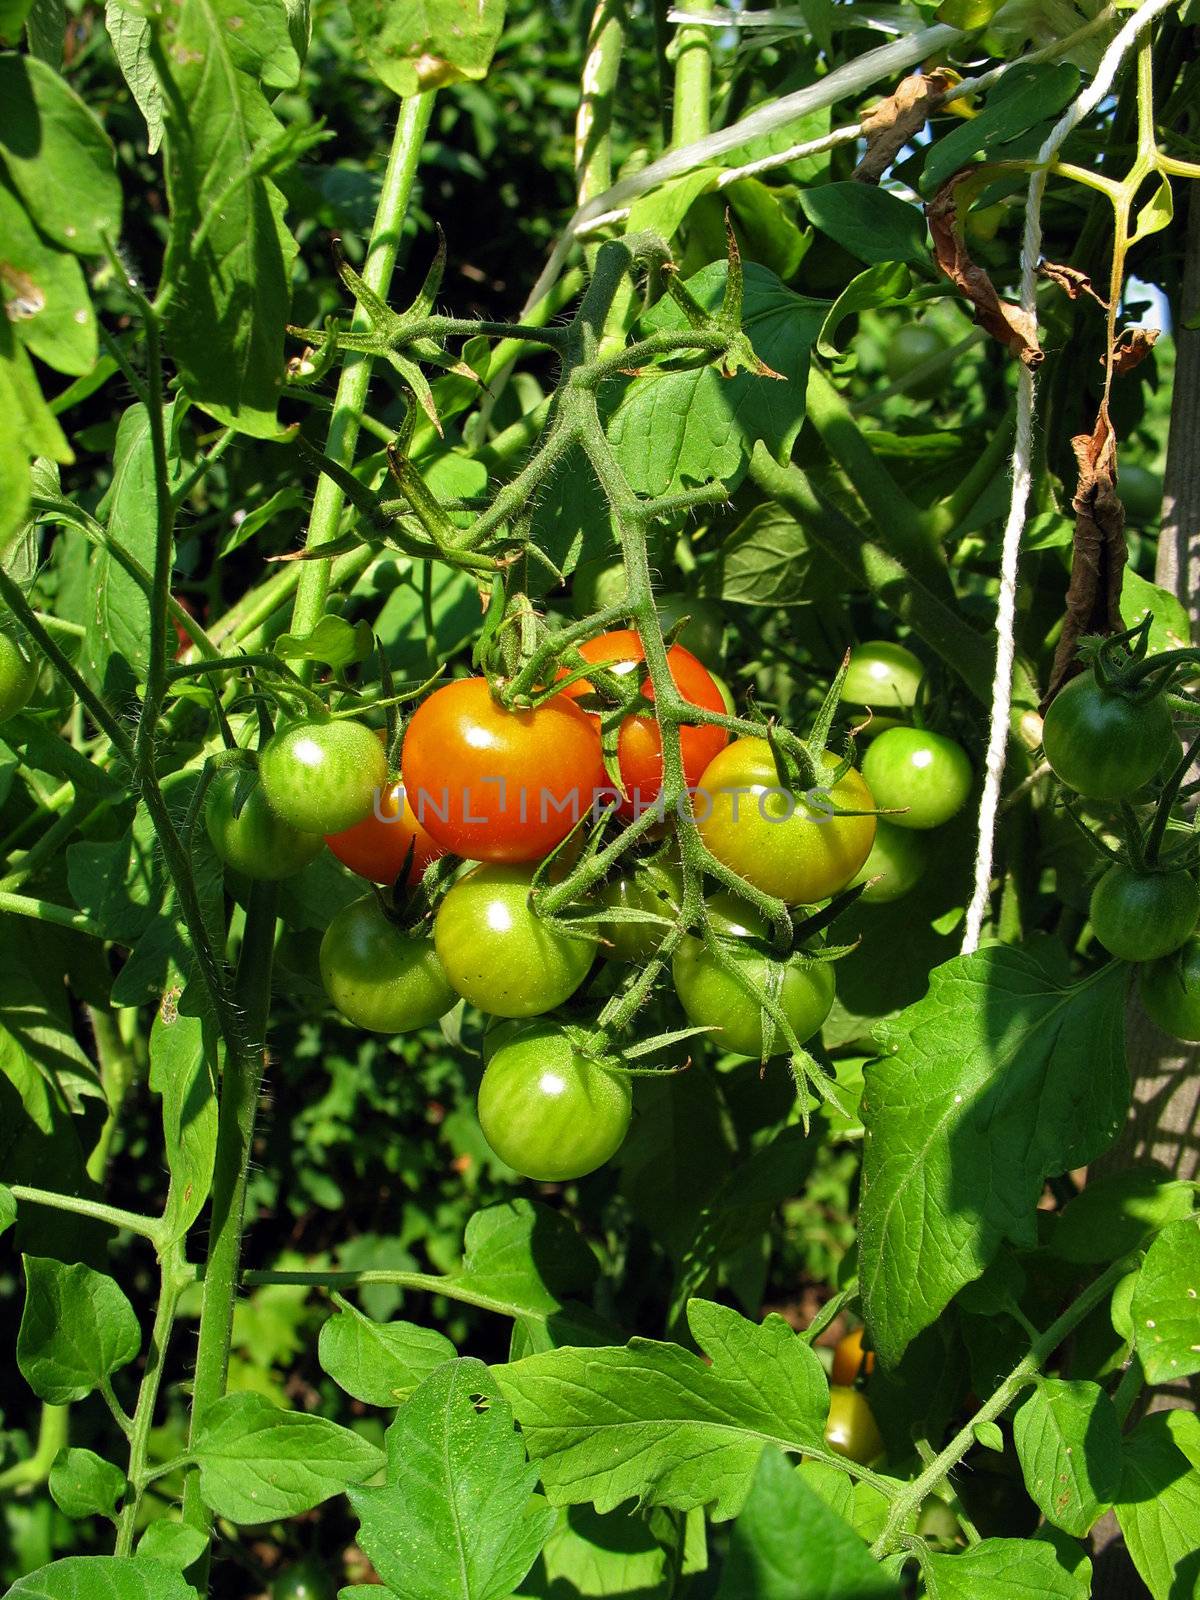 Some fresh grown tomatoes ripening right on the vine.